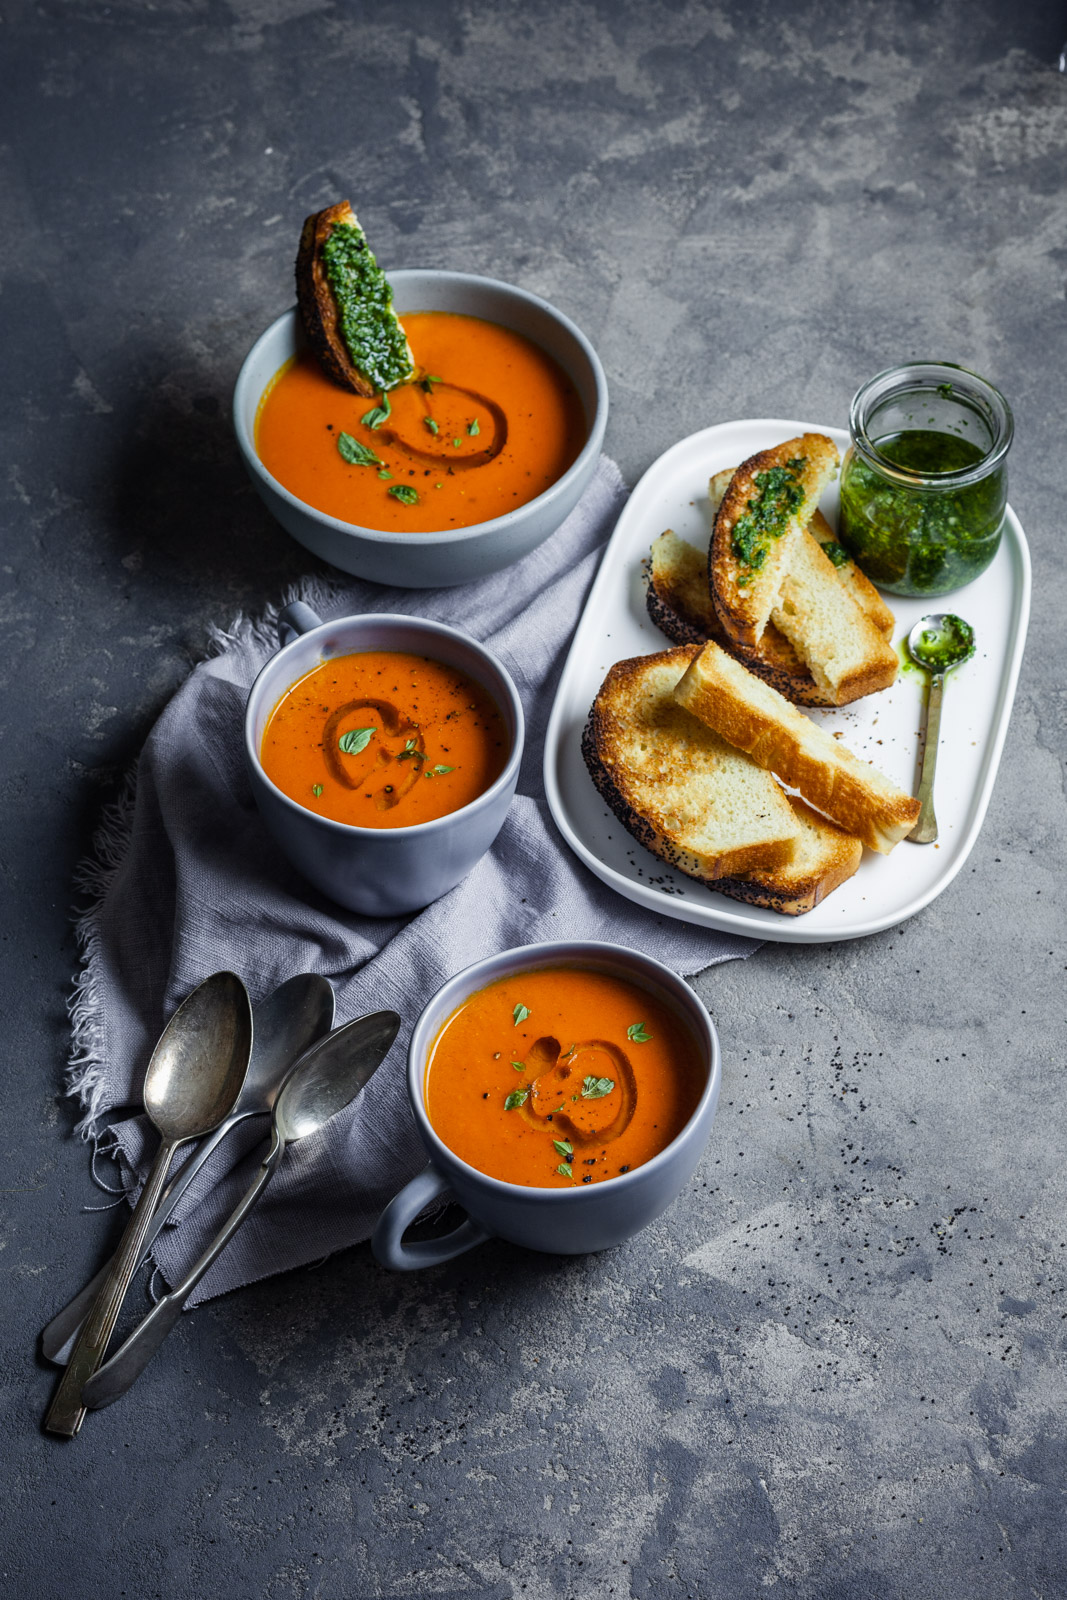 Classic Roasted Tomato And Sweet Pepper Soup With Swedish Poppy Seed Bread